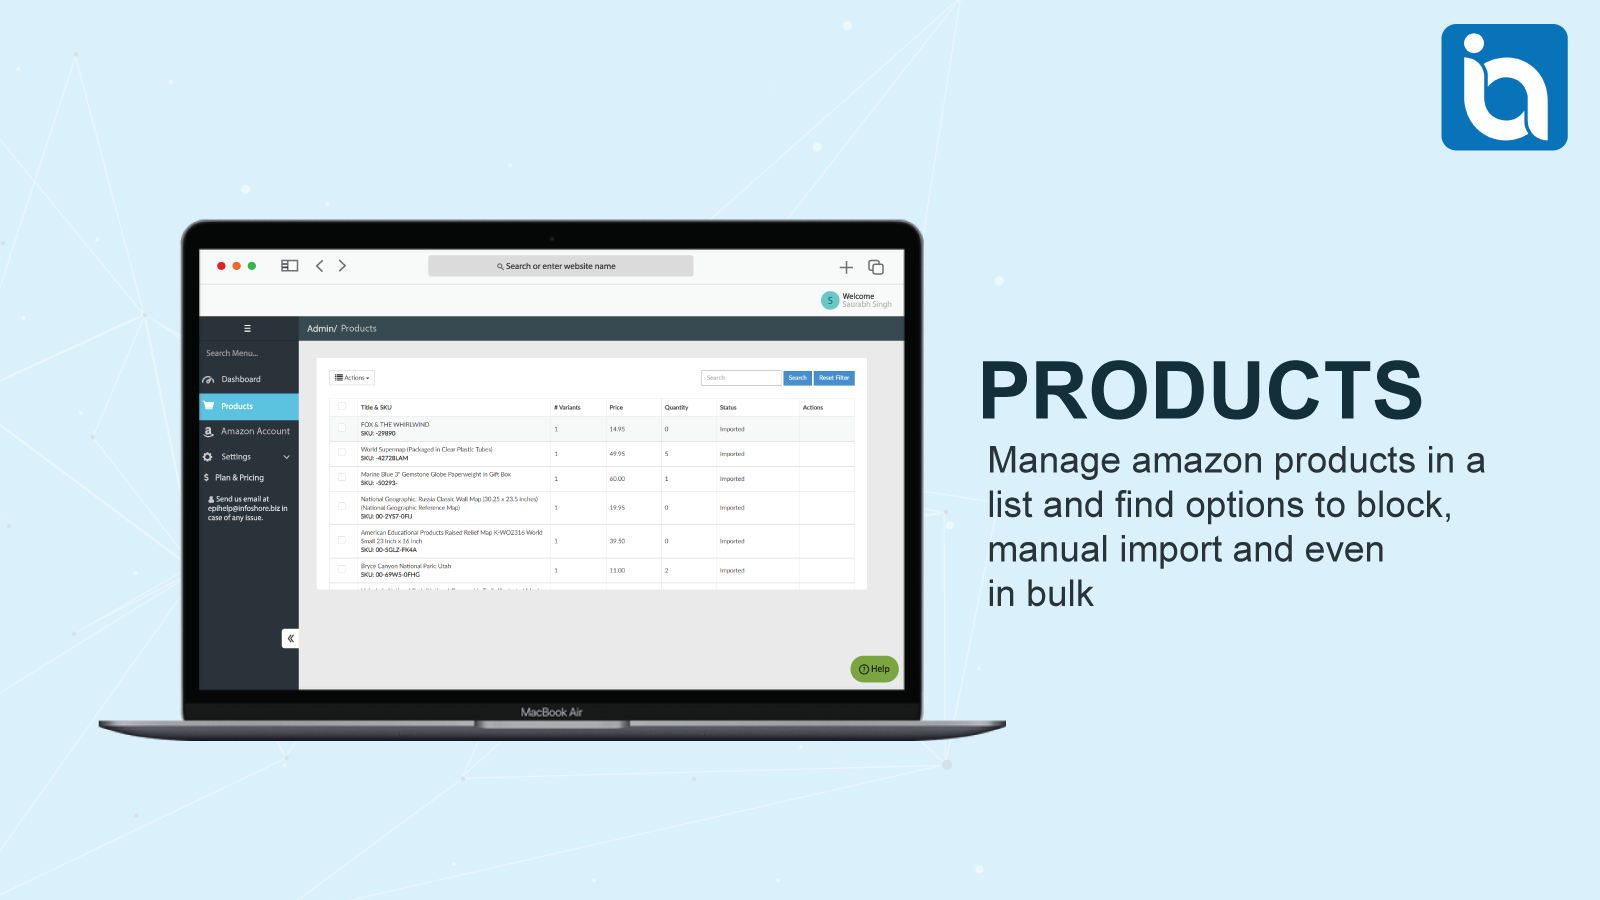 Manage products and import them 